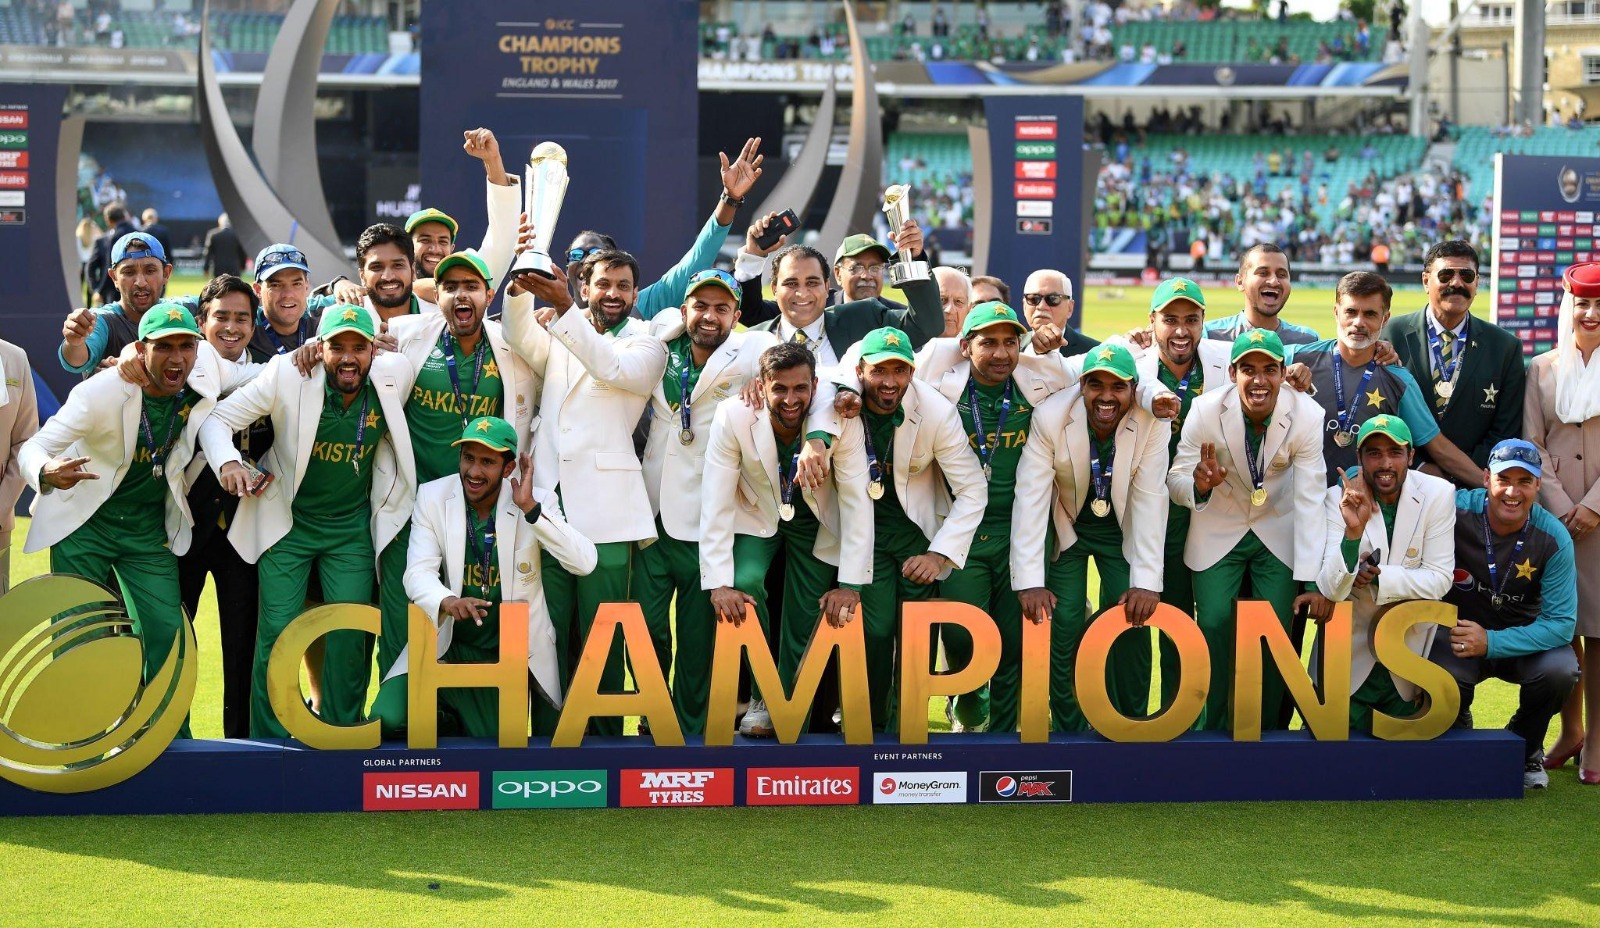 icc 2025 champions trophy: Top 7 teams will qualify